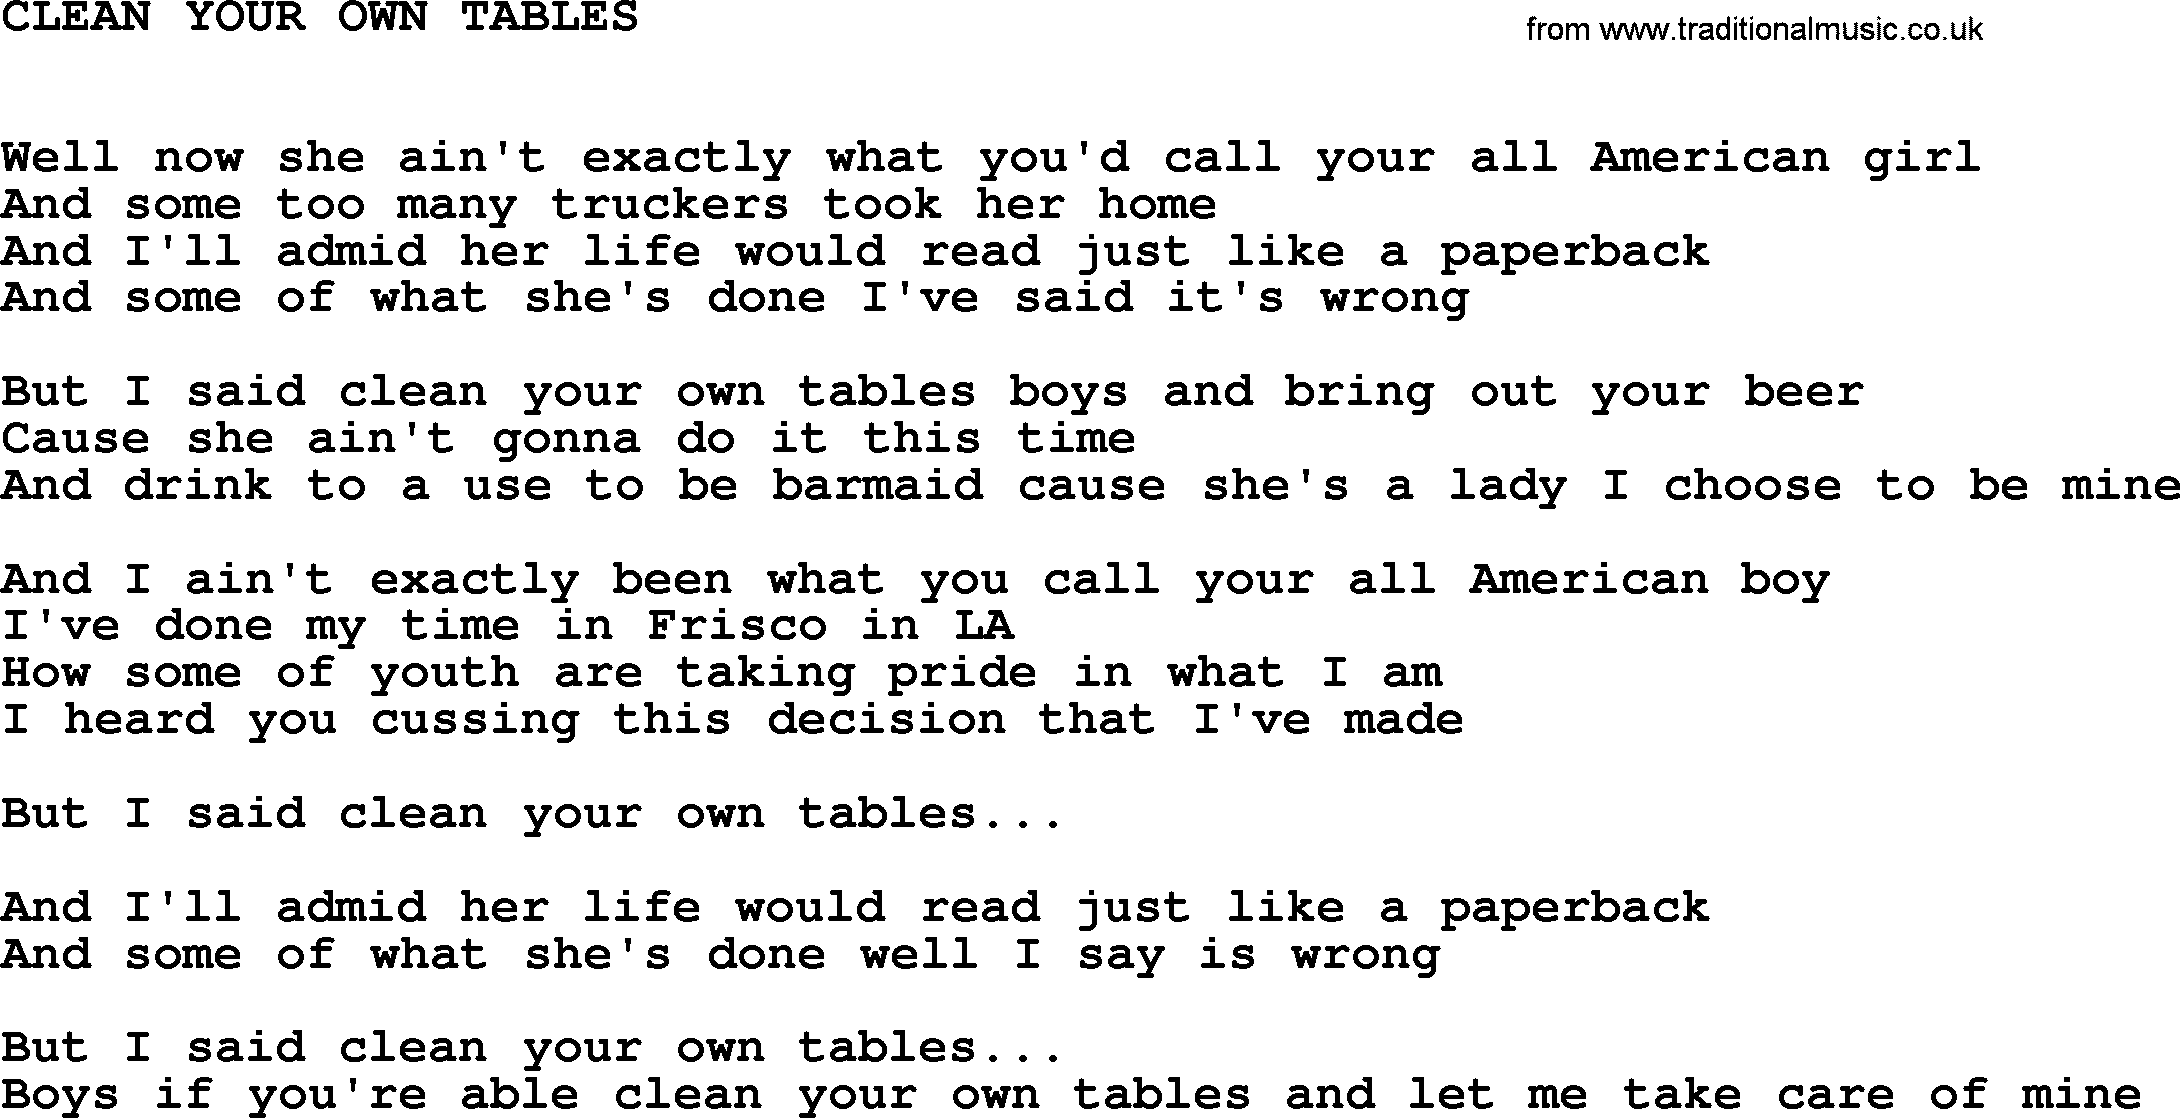 Johnny Cash song Clean Your Own Tables.txt lyrics